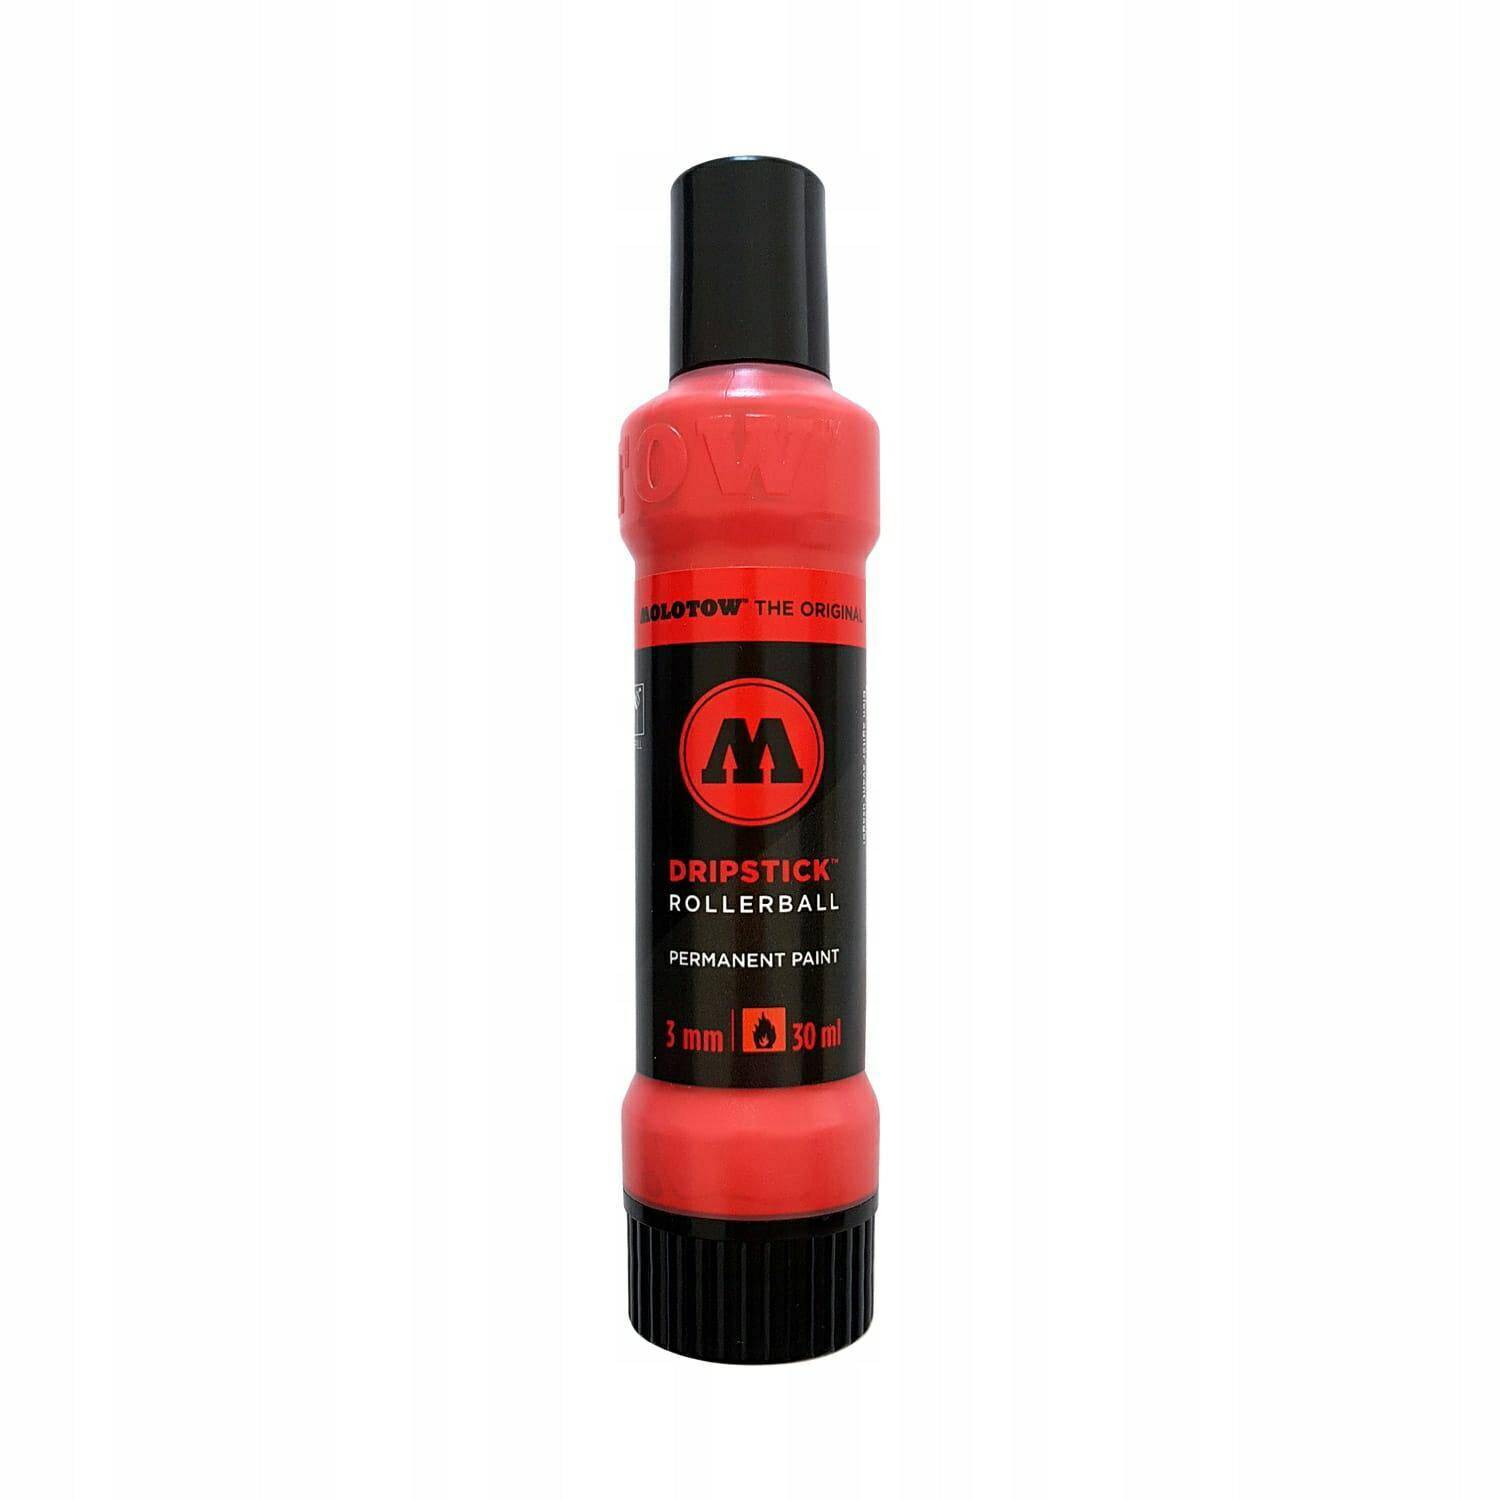 Dripstick rollerball traffic red Molotow